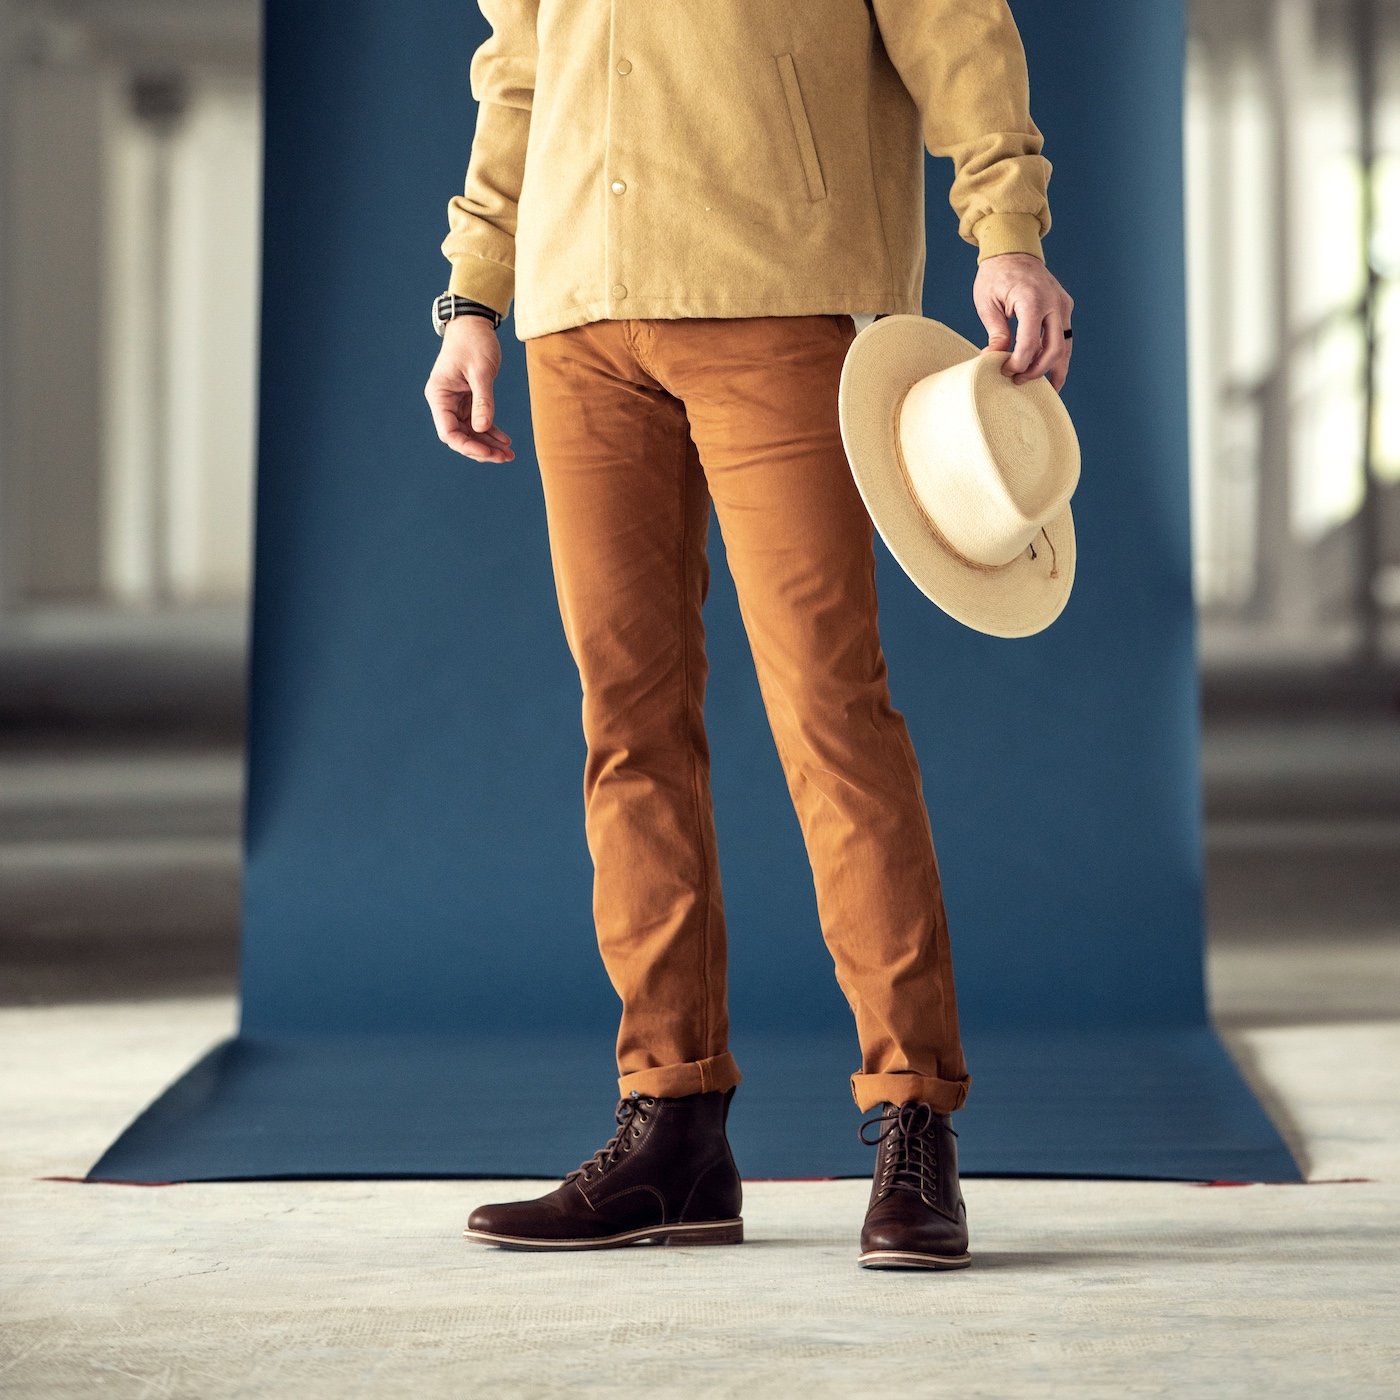 HELM - Man standing in the Zind Brown and orange pants